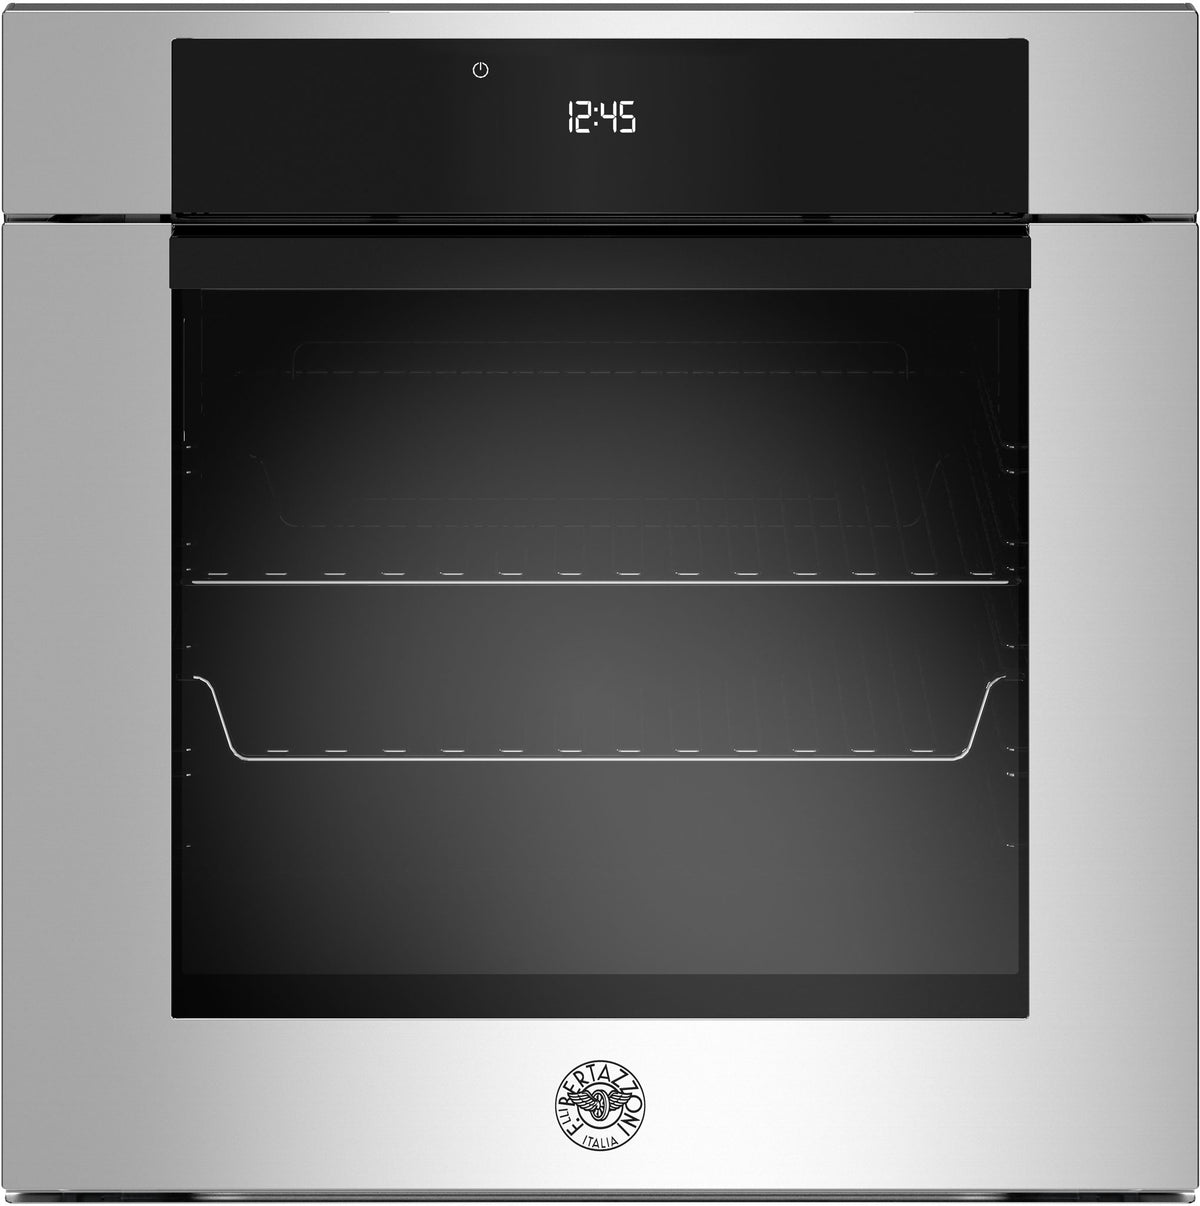 BERTAZZONI F6011MODPLX 60cm Electric Multifunction Oven with Pyrolytic cleaning in Stainless Steel